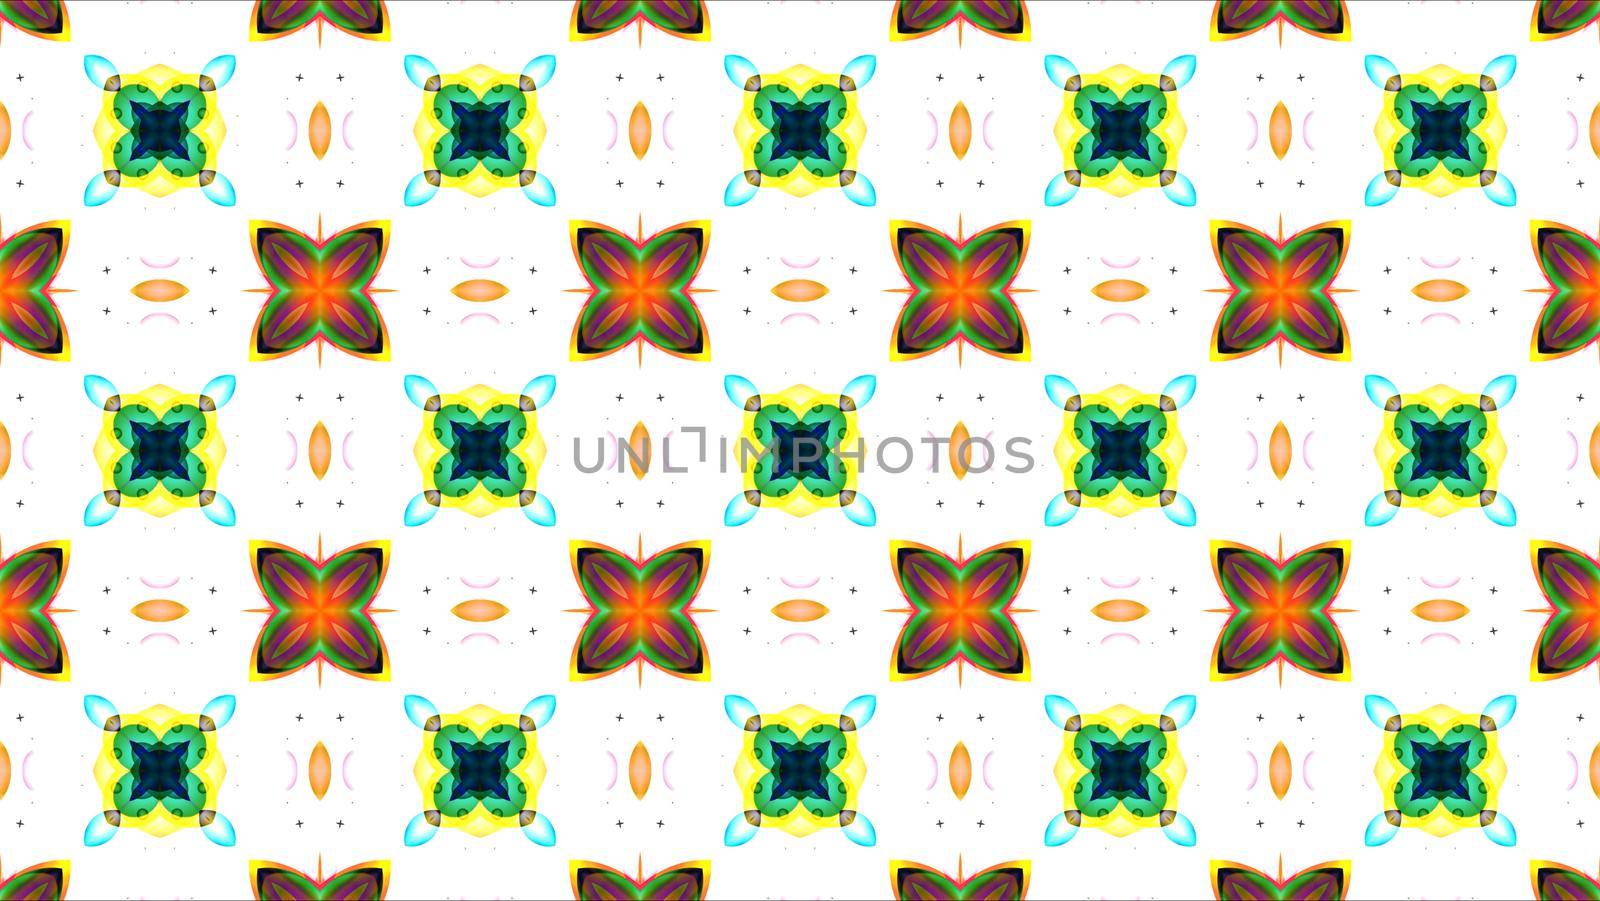 topaz ring and cross blue yellow border eight little stars blue leaves with super starburst kaleidoscope reflection texture pattern background